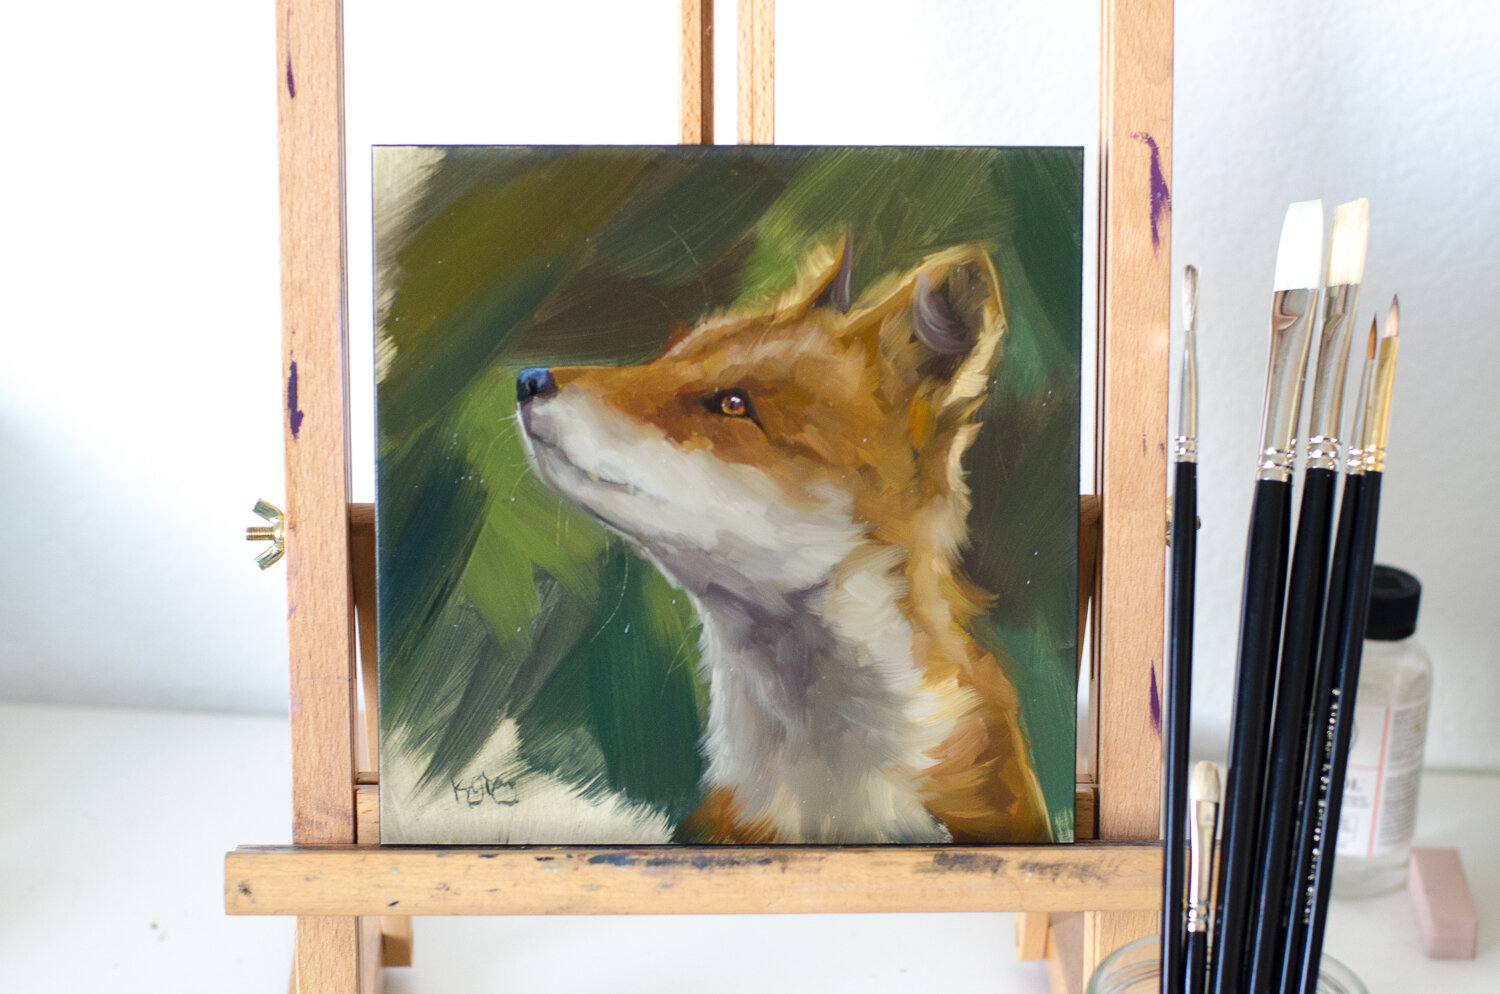  “Red fox study” - Oil sketch on archival panel, 8” x 8” 